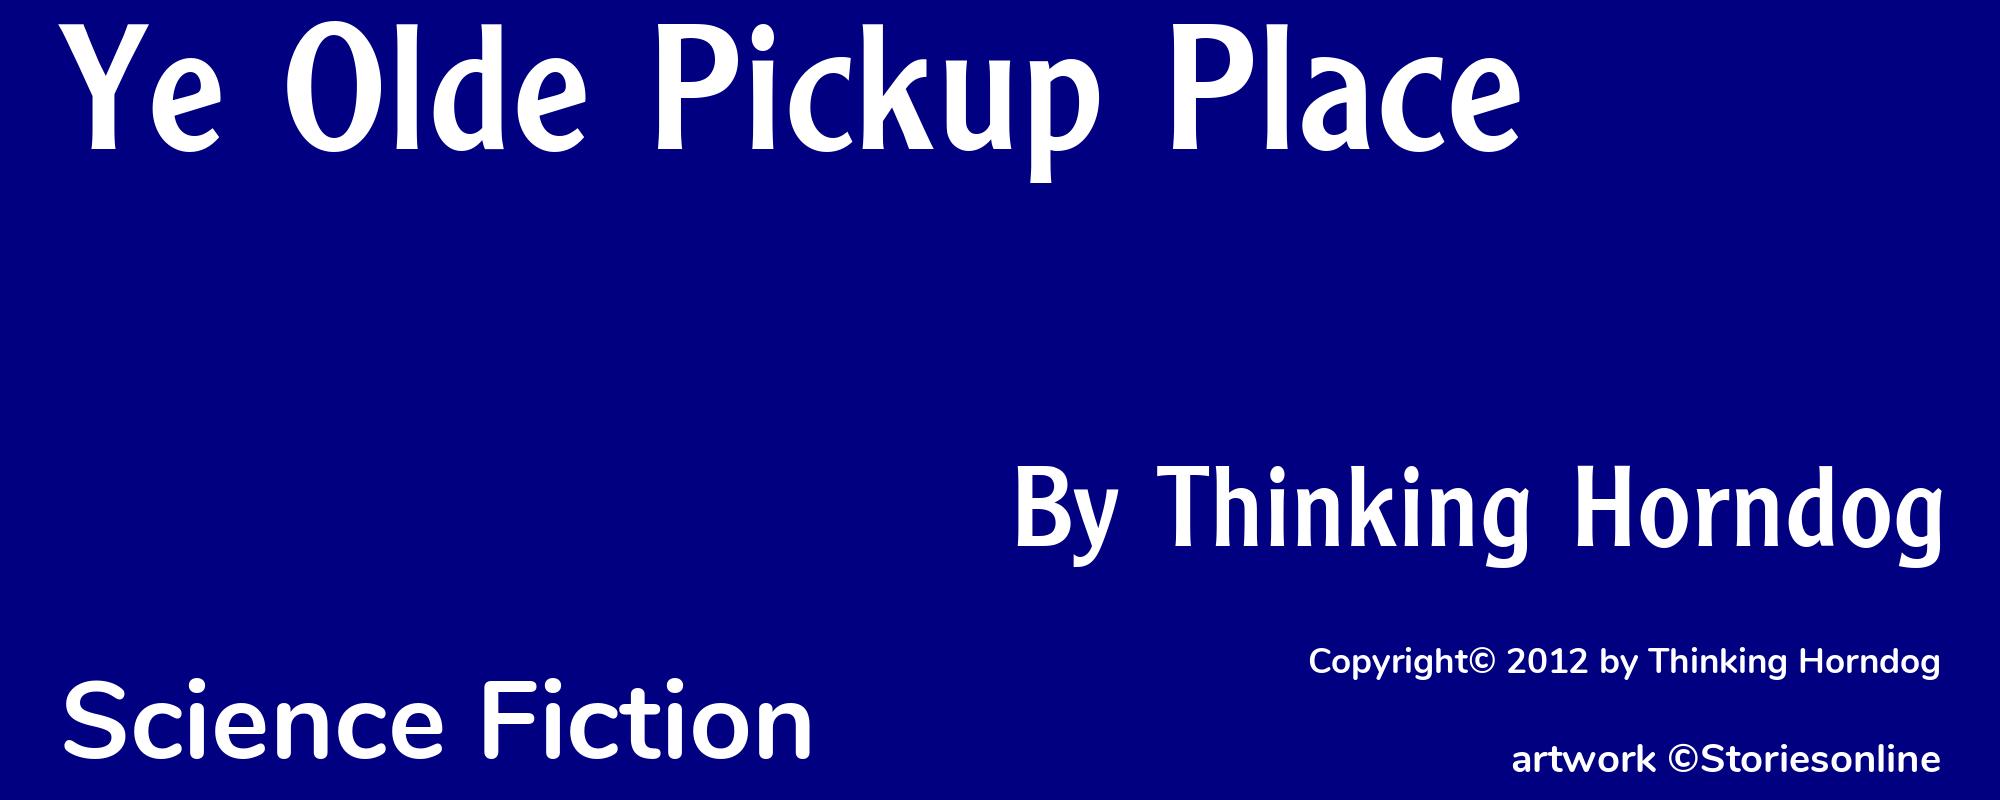 Ye Olde Pickup Place - Cover